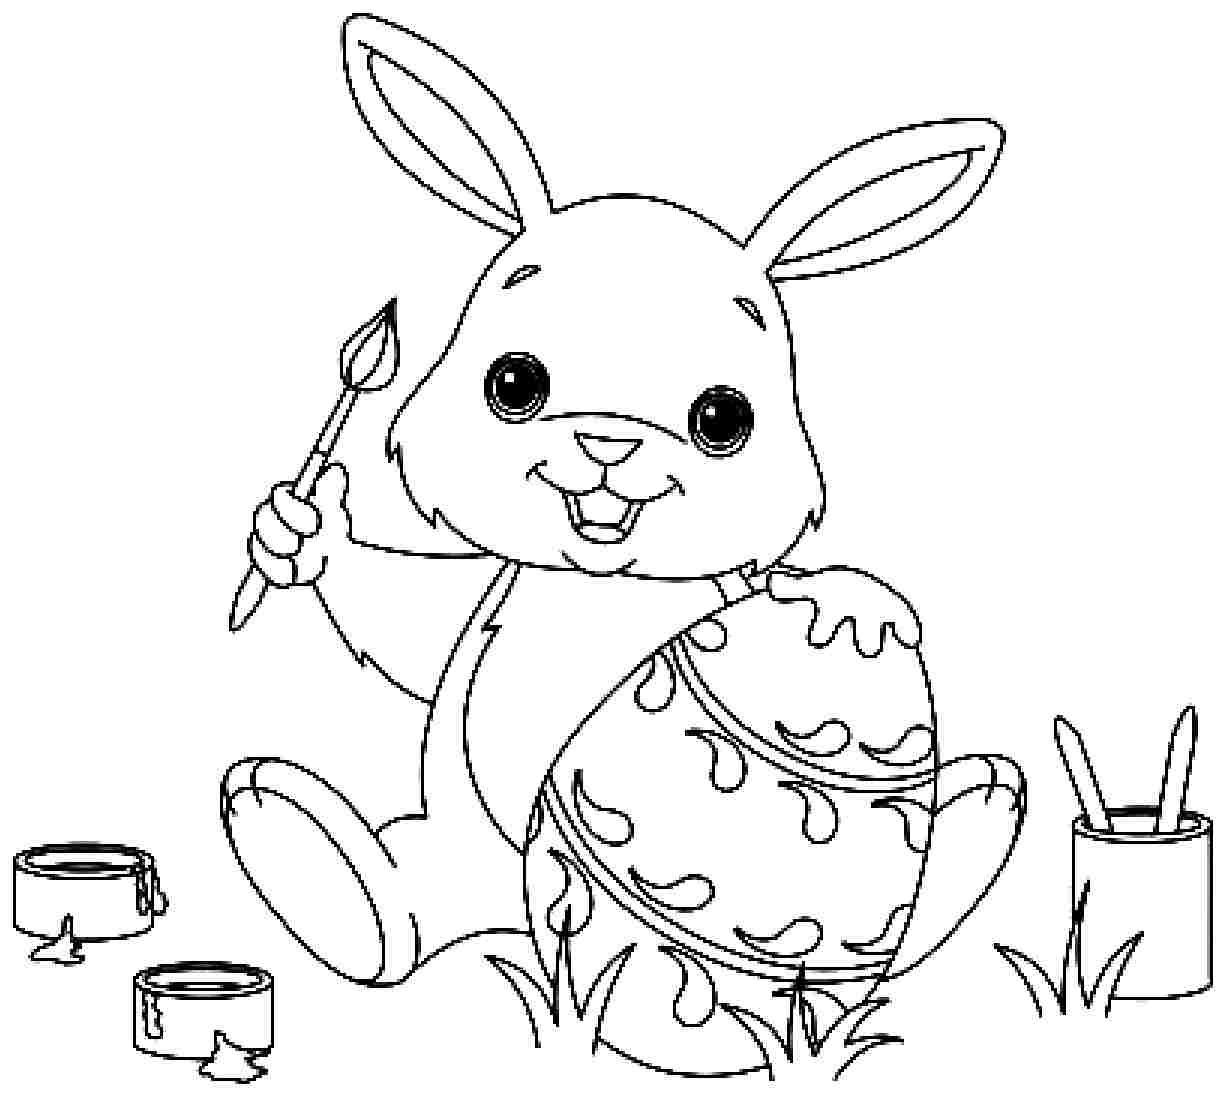 Coloring Pages Easter Bunny Free Printable Coloring Pages